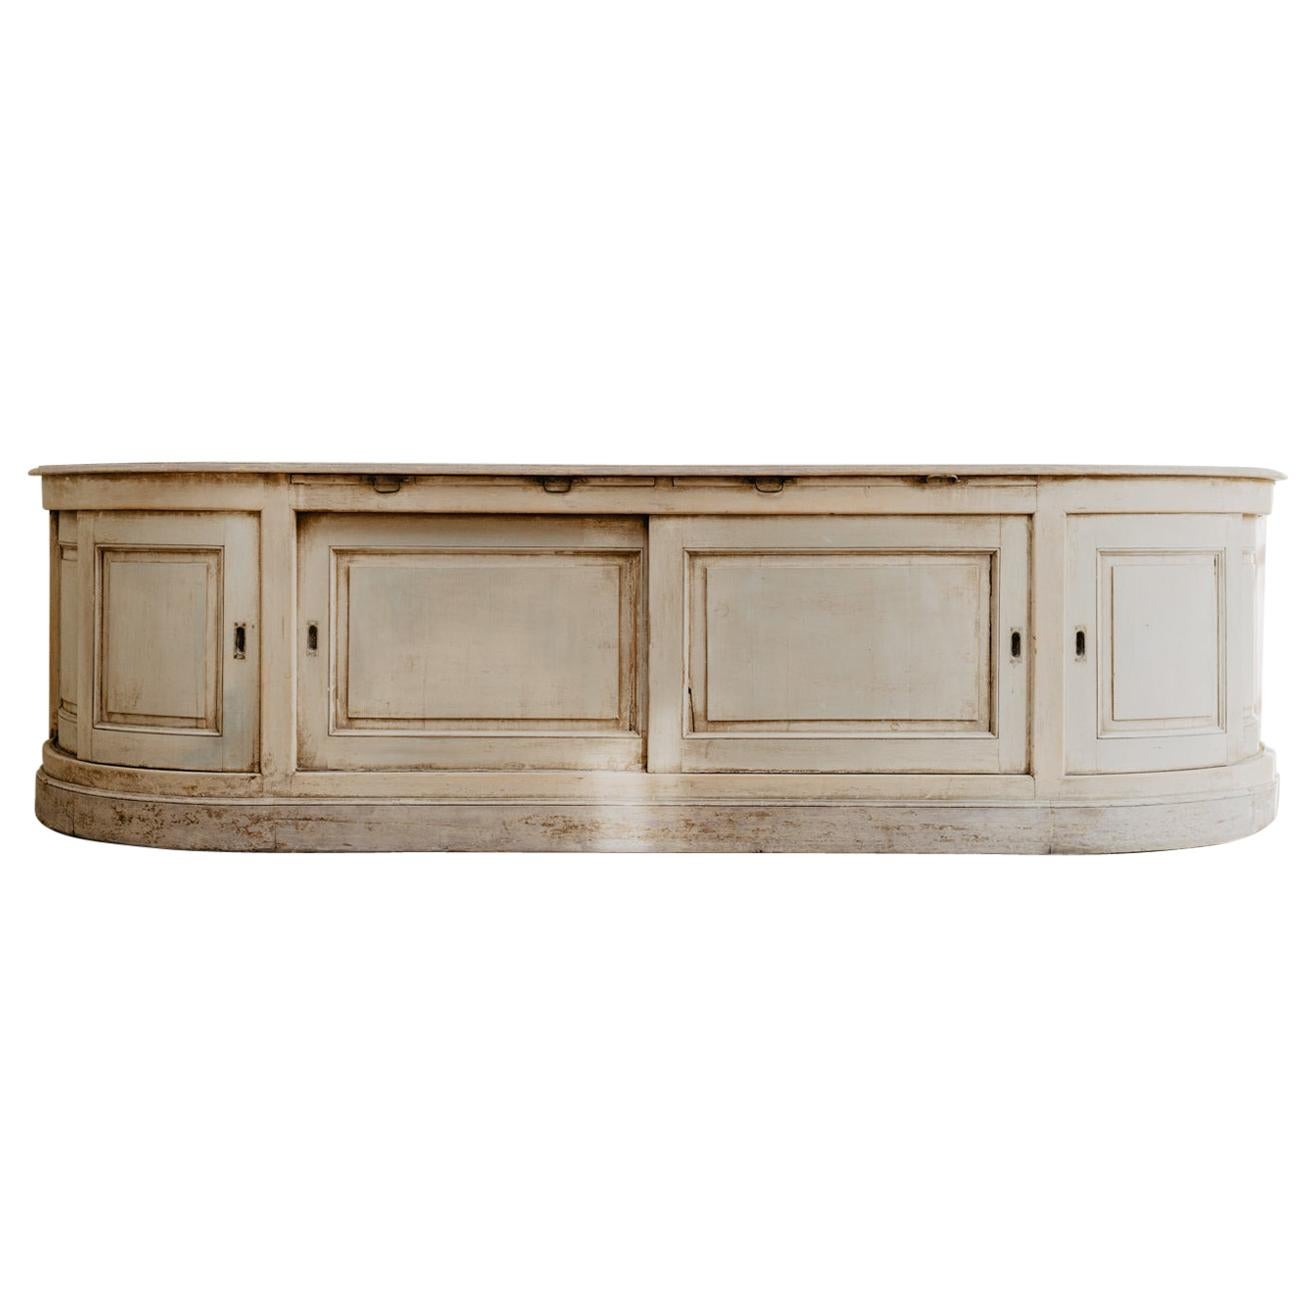 19th Century Creamcolored Pinewood Bakeryshop Counter/Enfilade/Dresser